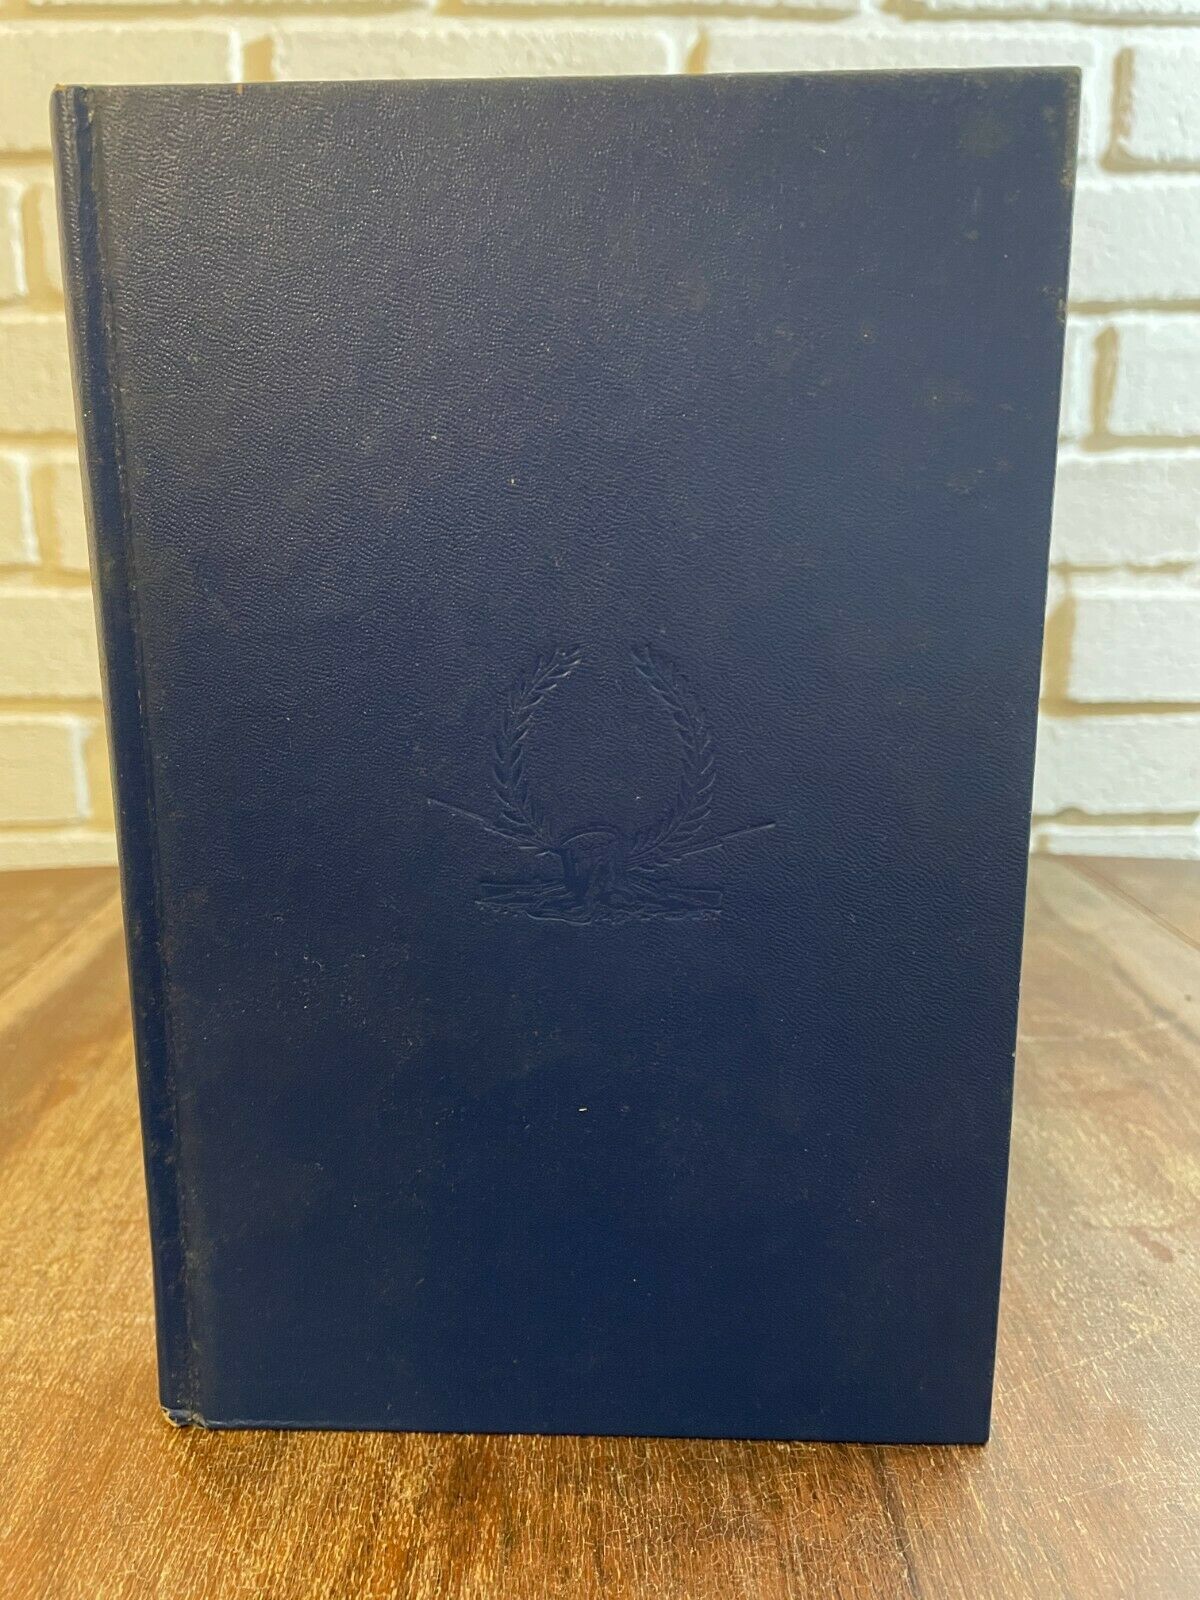 BLUE HURRICANE by F. Van Wyck Mason. First Edition Hardcover from 1954 (C1)